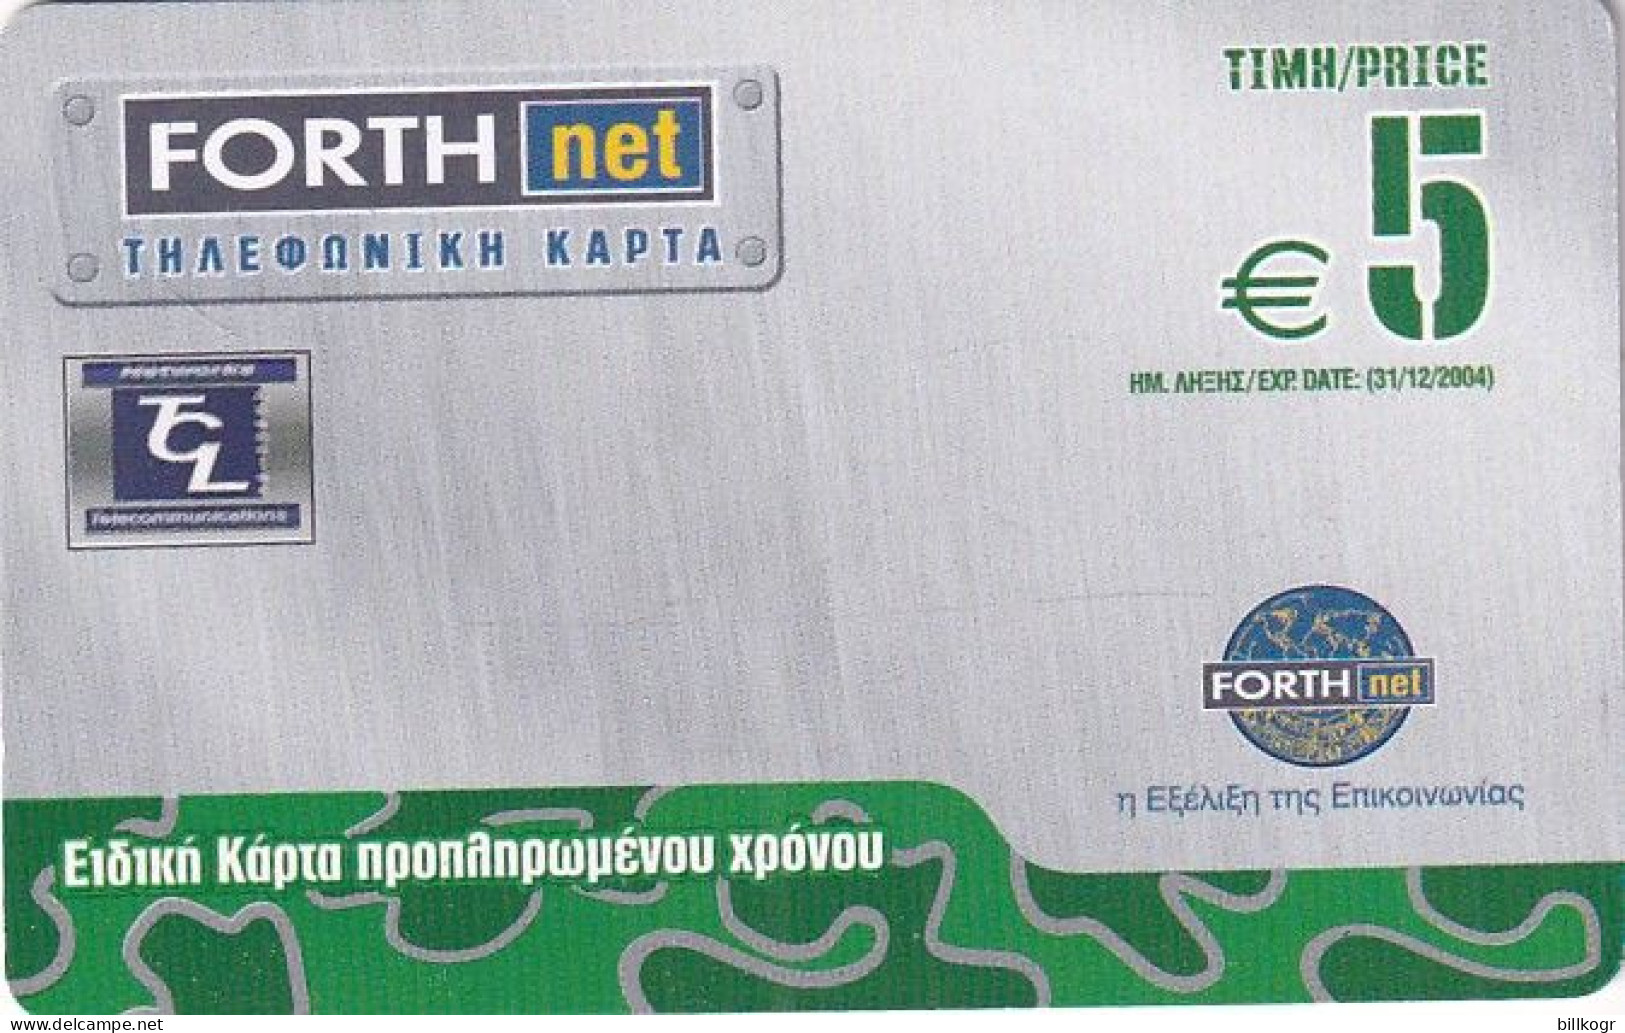 GREECE - Forthnet Telephony Magnetic Telecard, First Issue 5 Euro, Sample - Greece